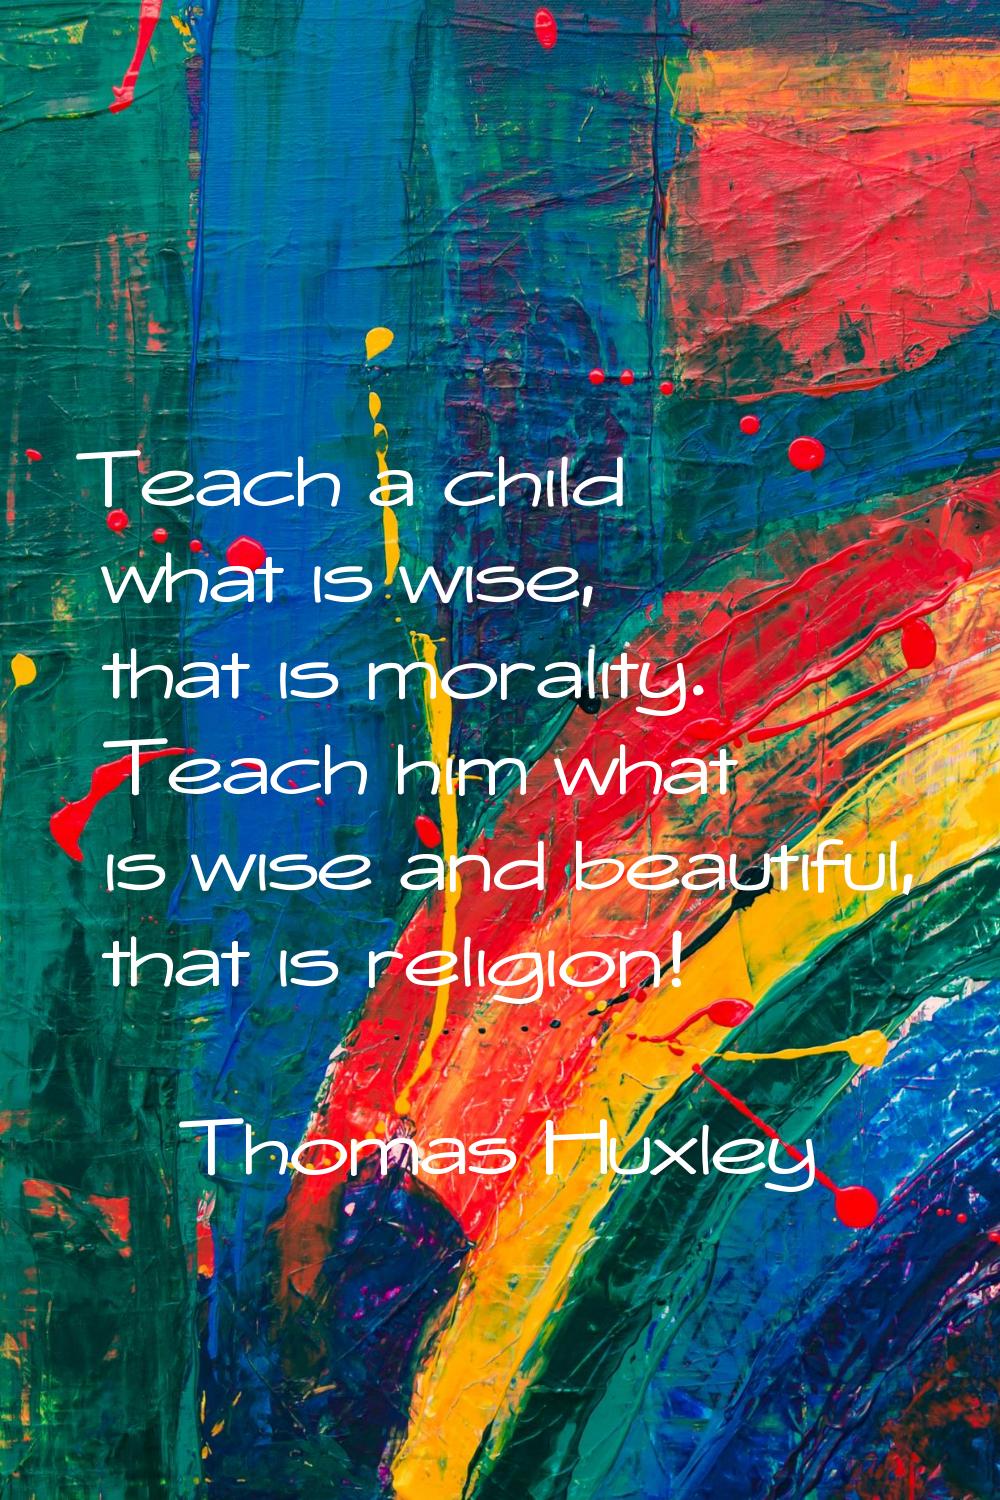 Teach a child what is wise, that is morality. Teach him what is wise and beautiful, that is religio